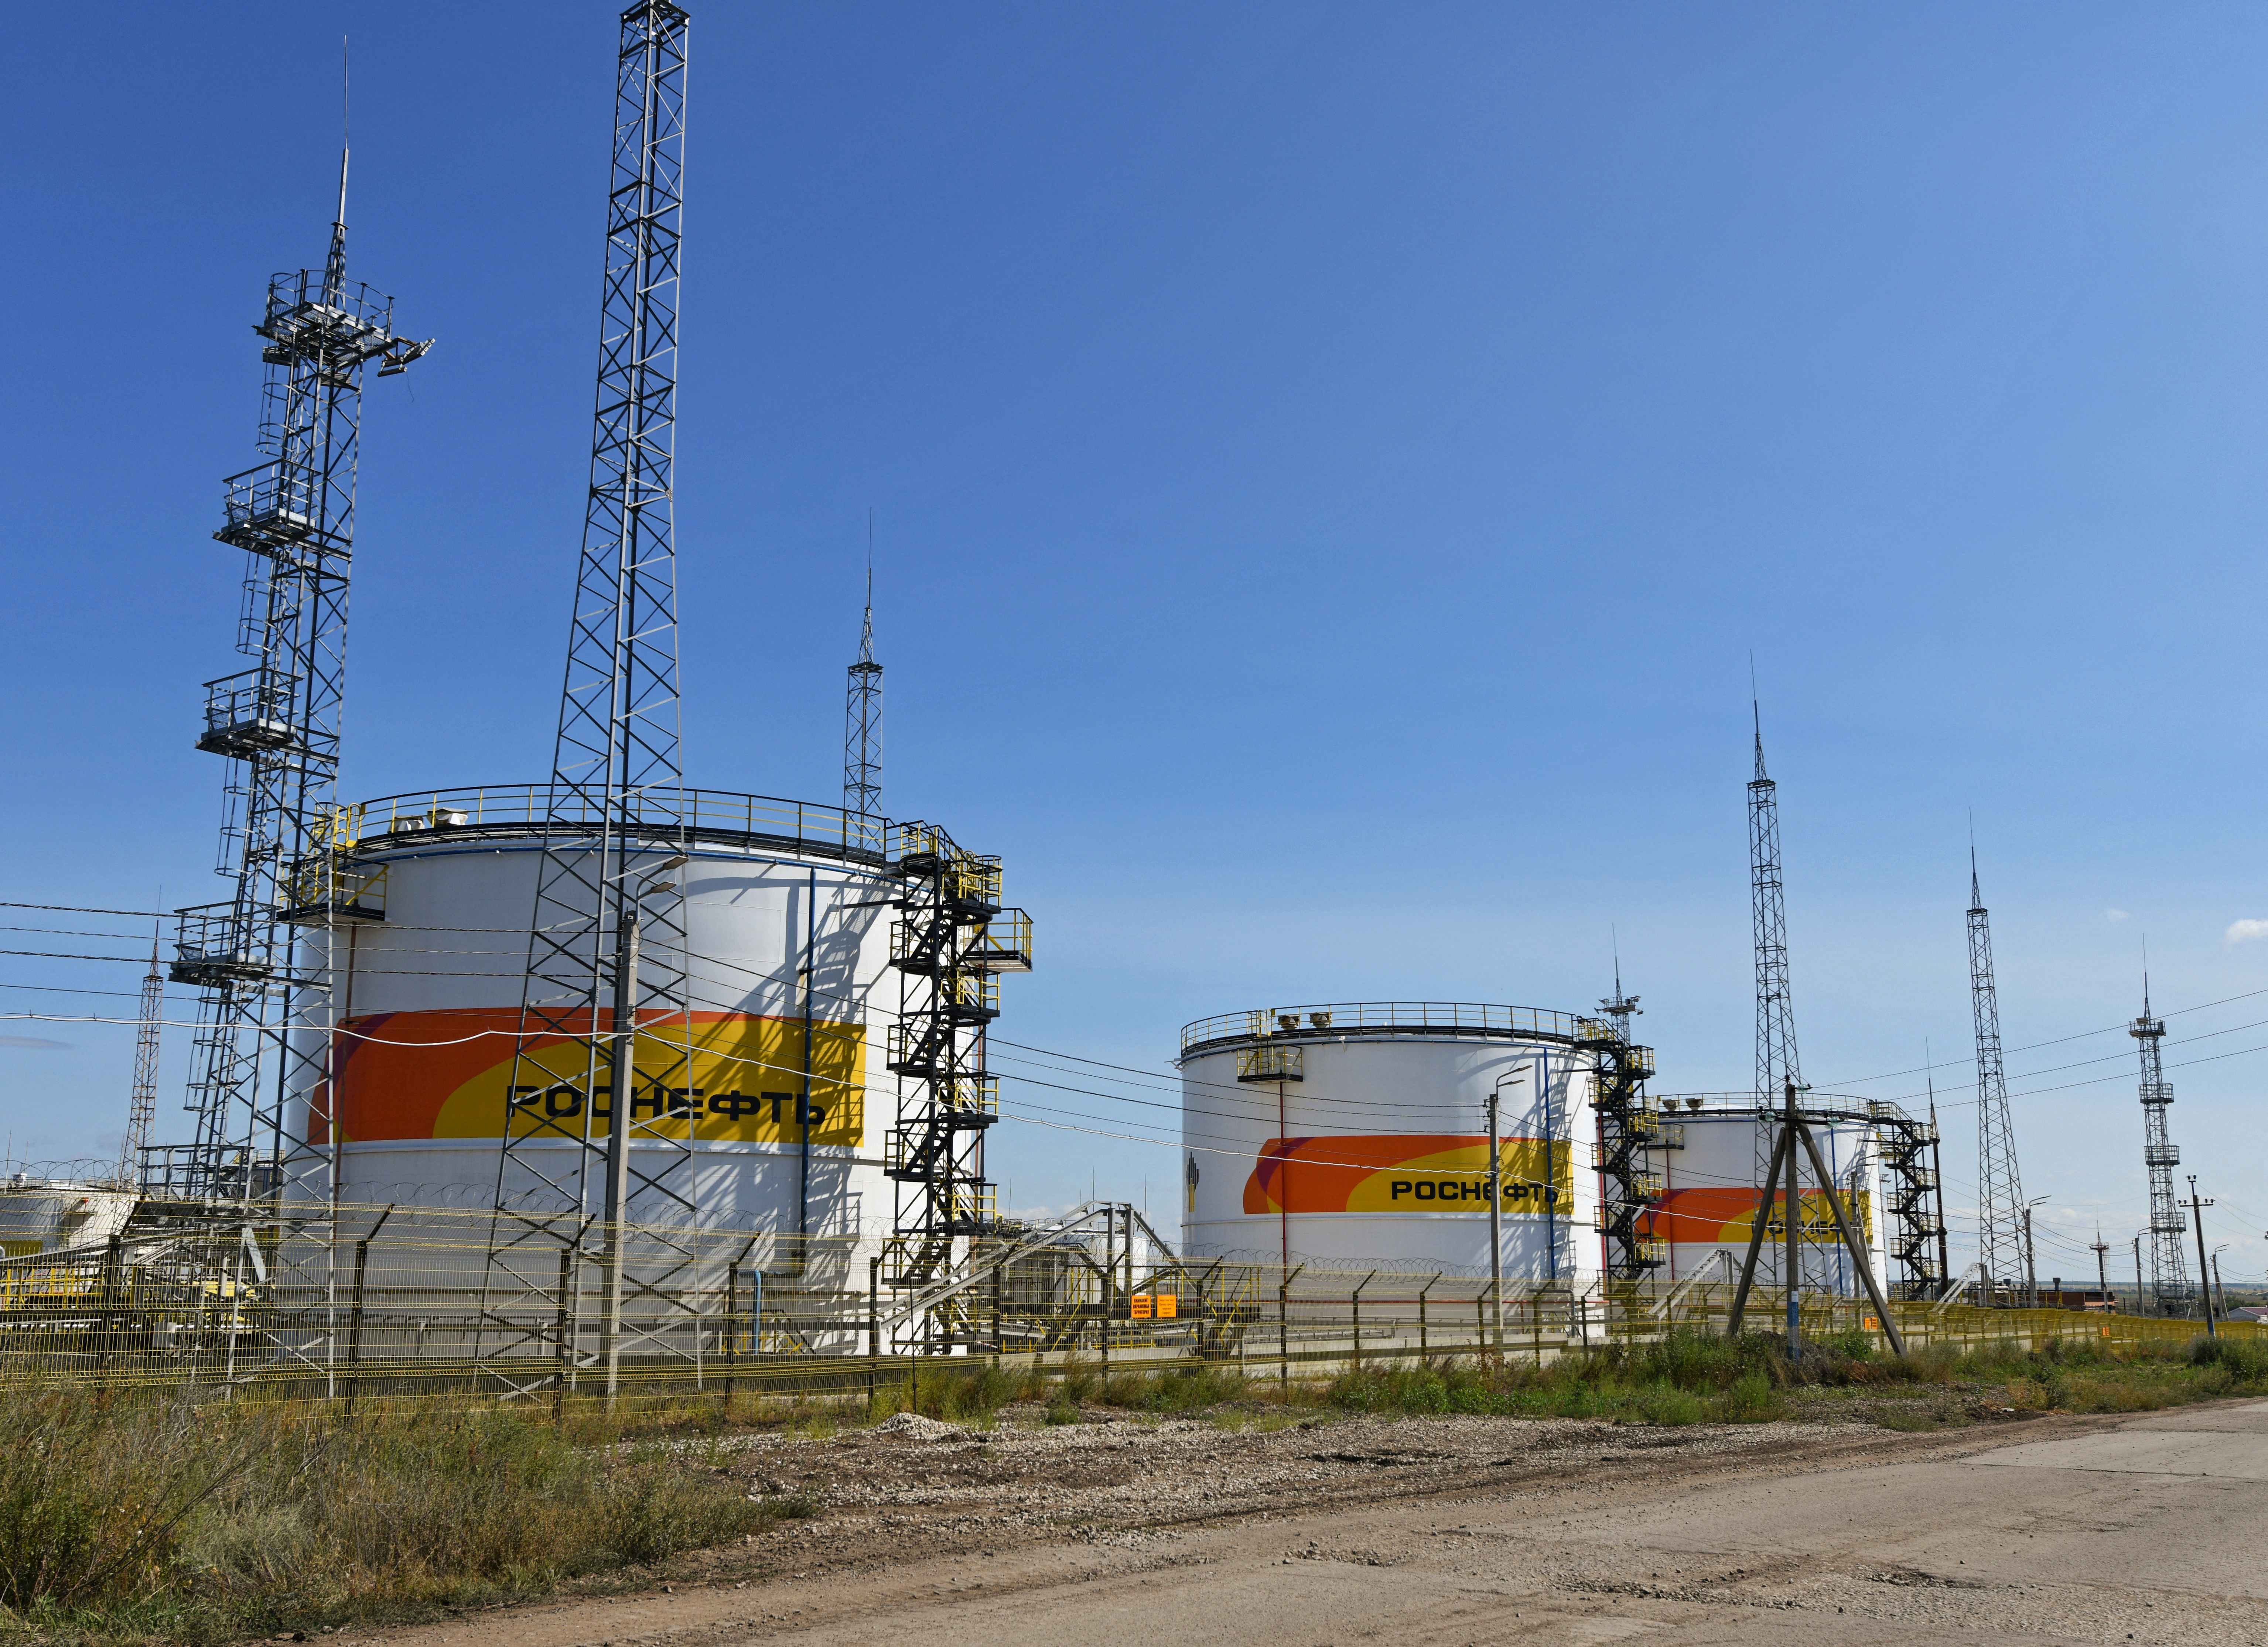 A view shows fuel tanks at a Rosneft's facility outside Neftegorsk